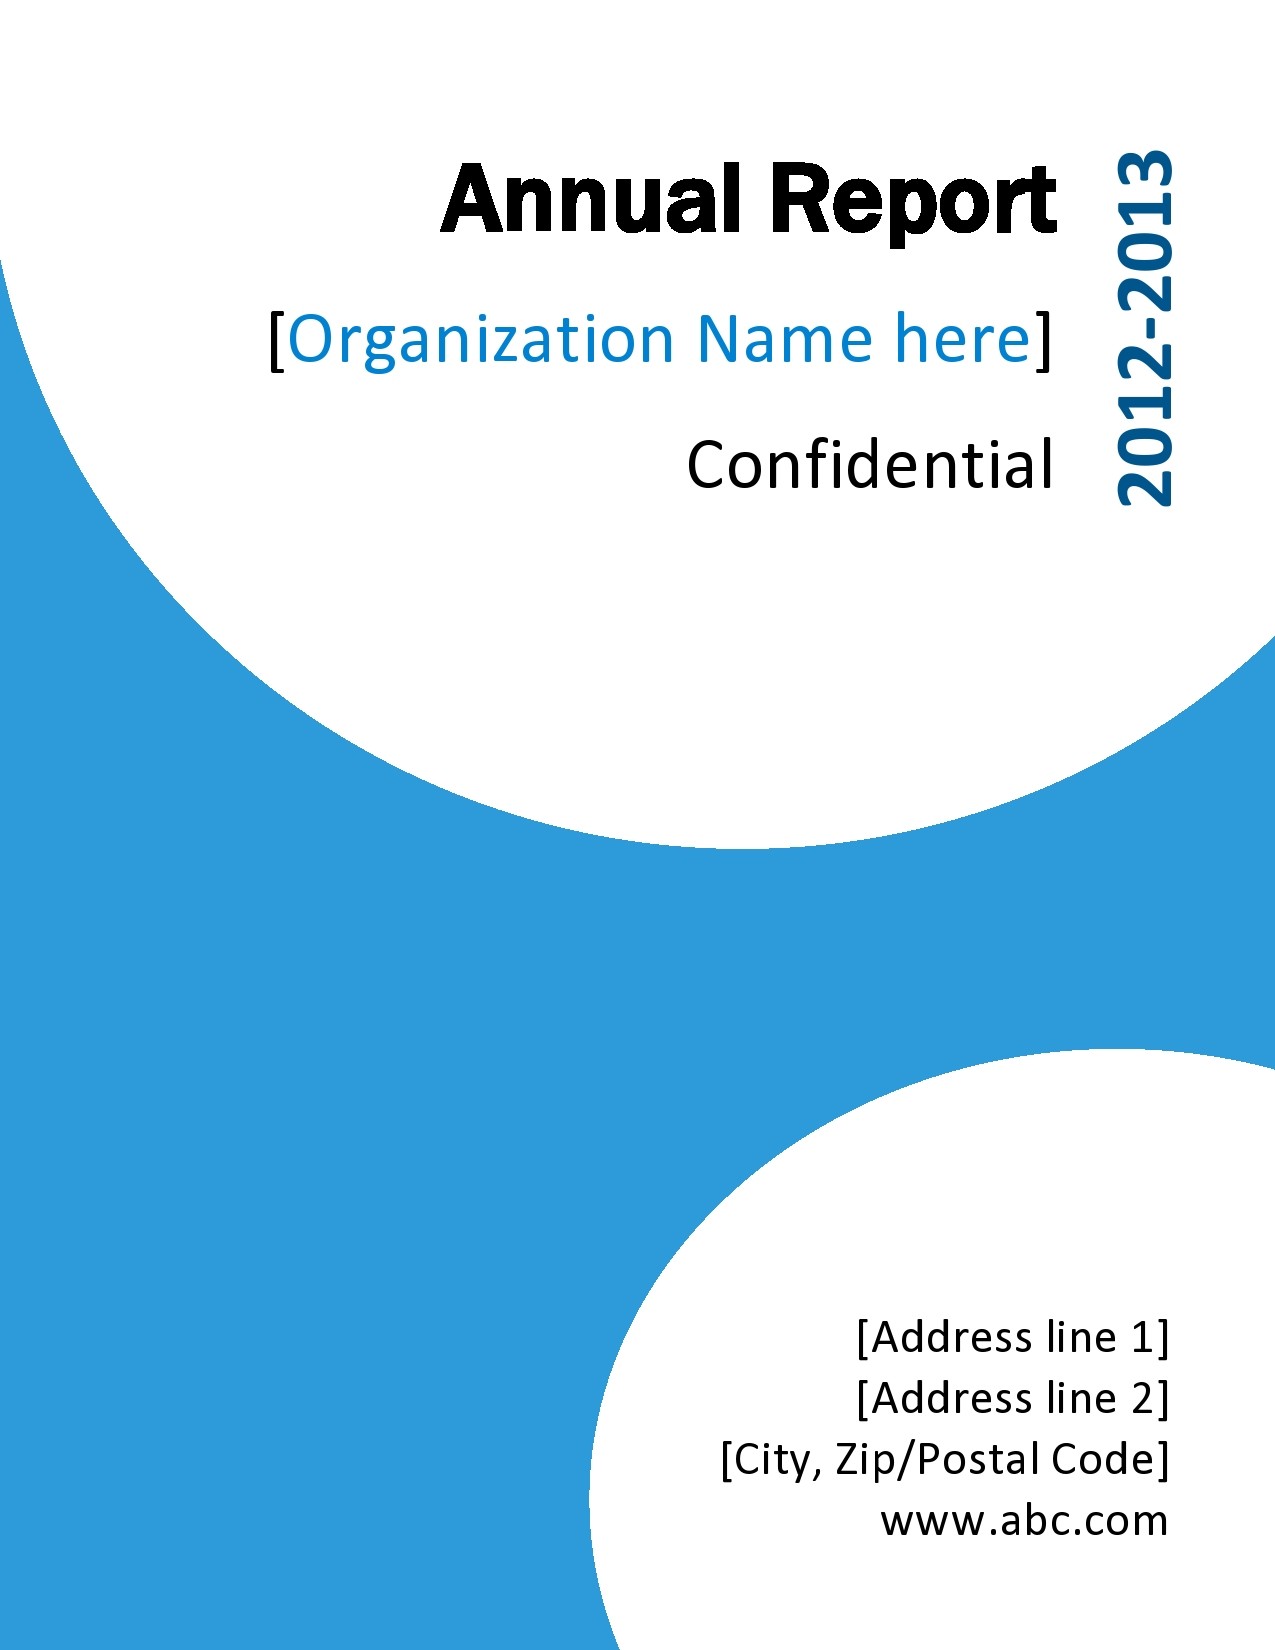 Annual Financial Report Template Word